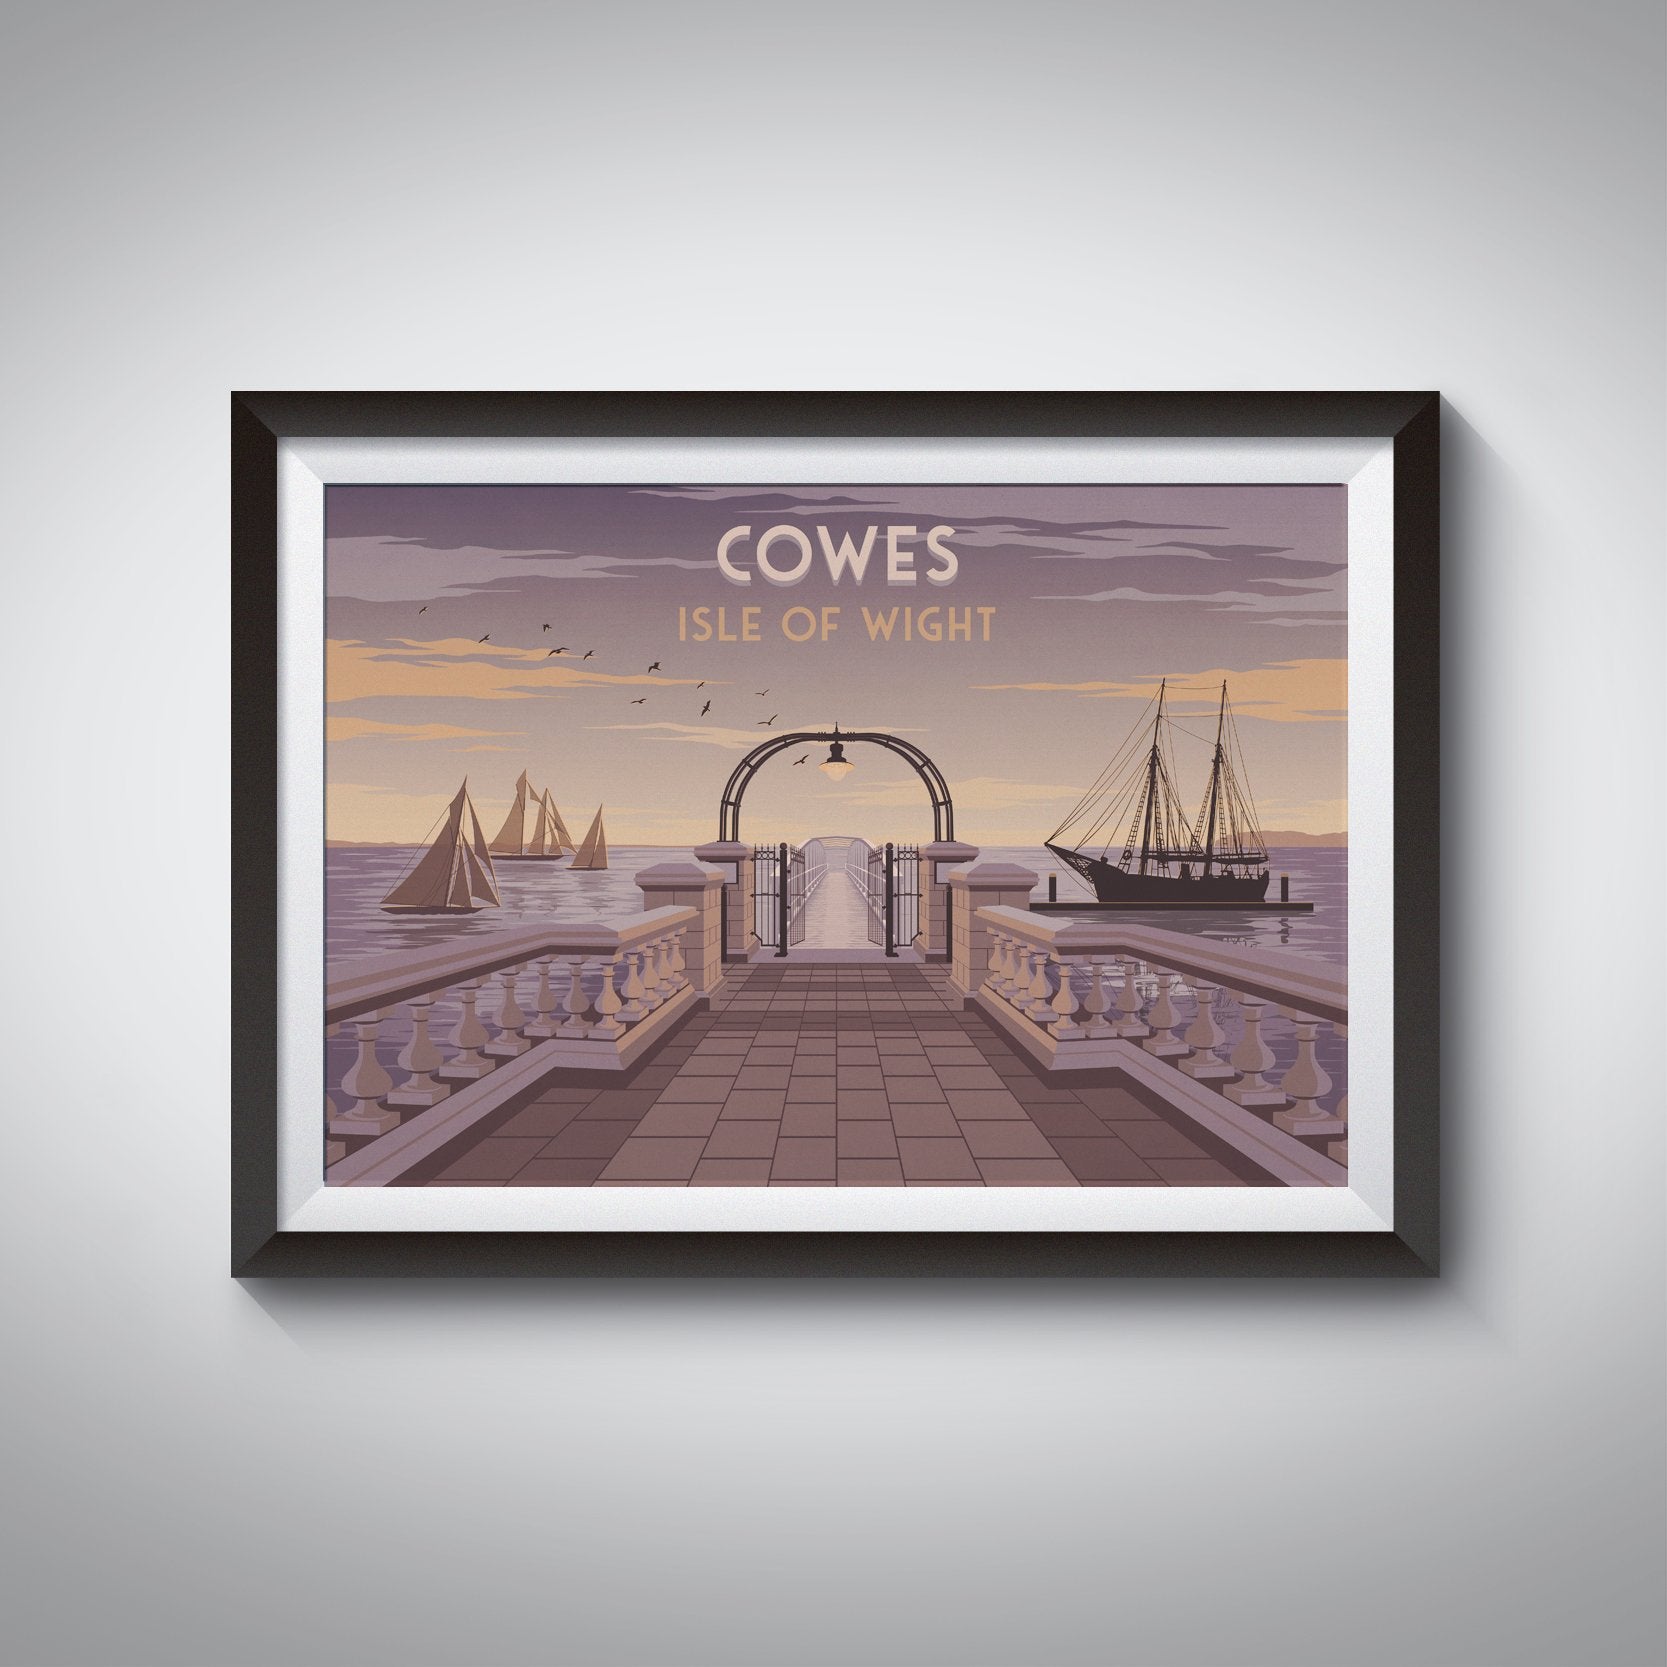 Cowes Isle of Wight Travel Poster